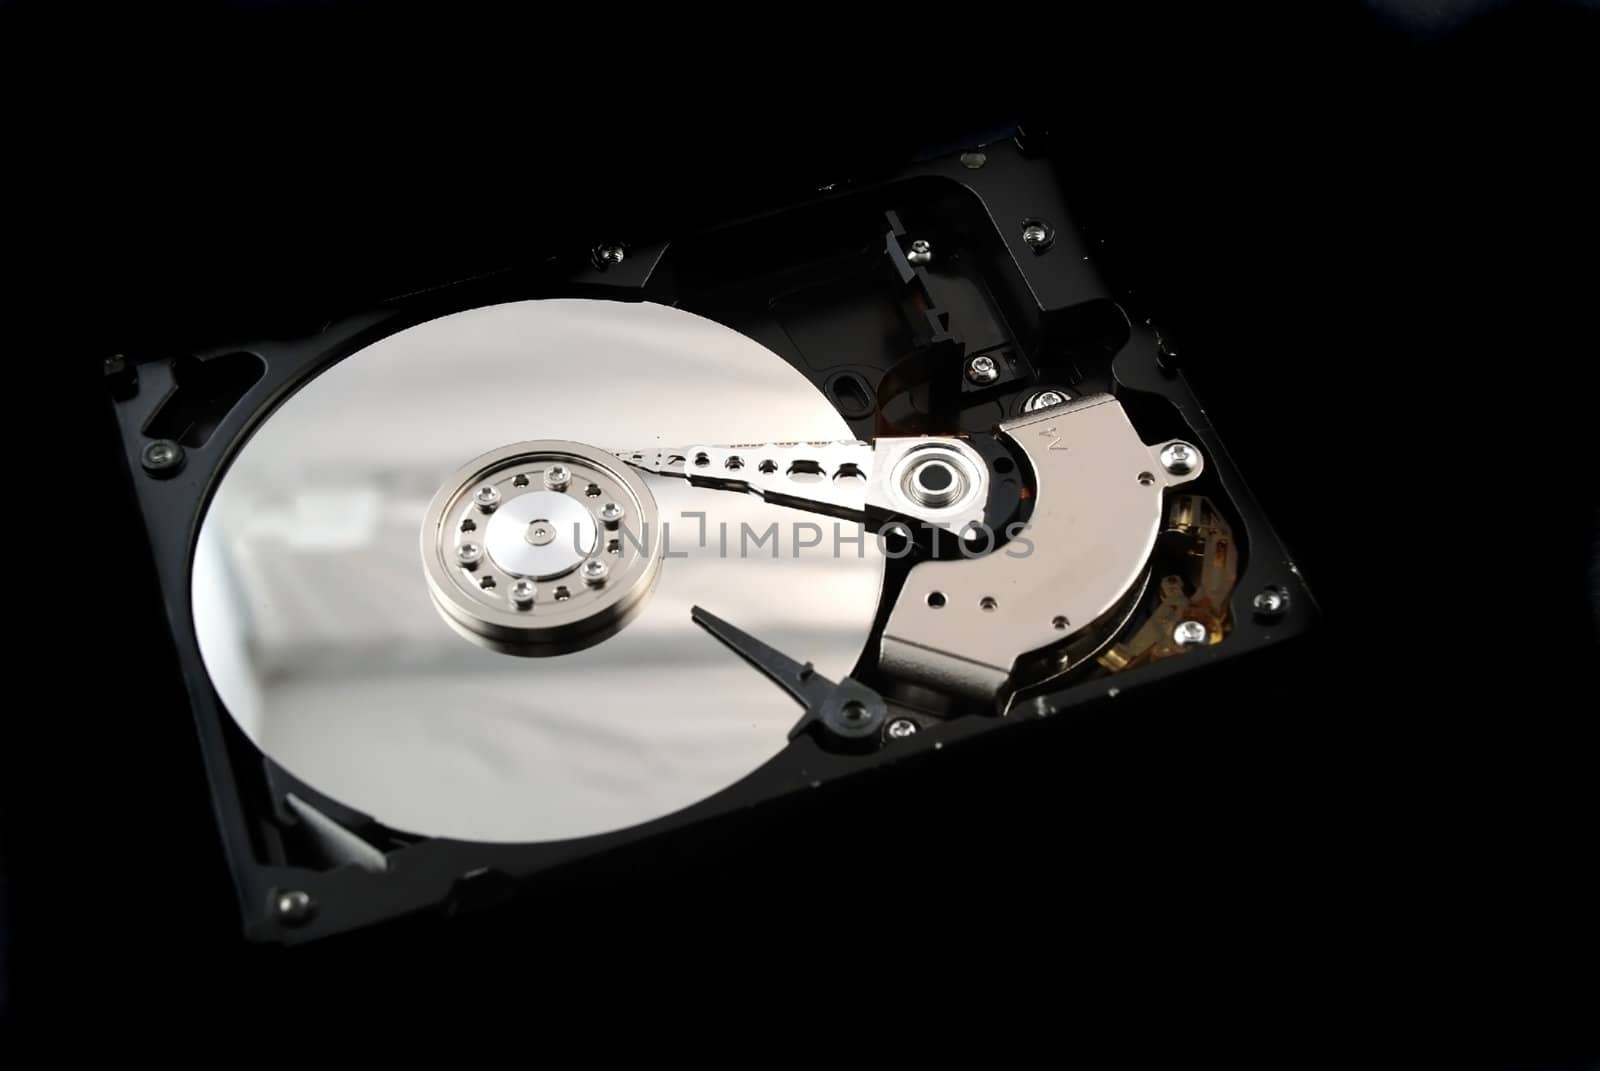 Stock pictures of the interior of a compute hard drive